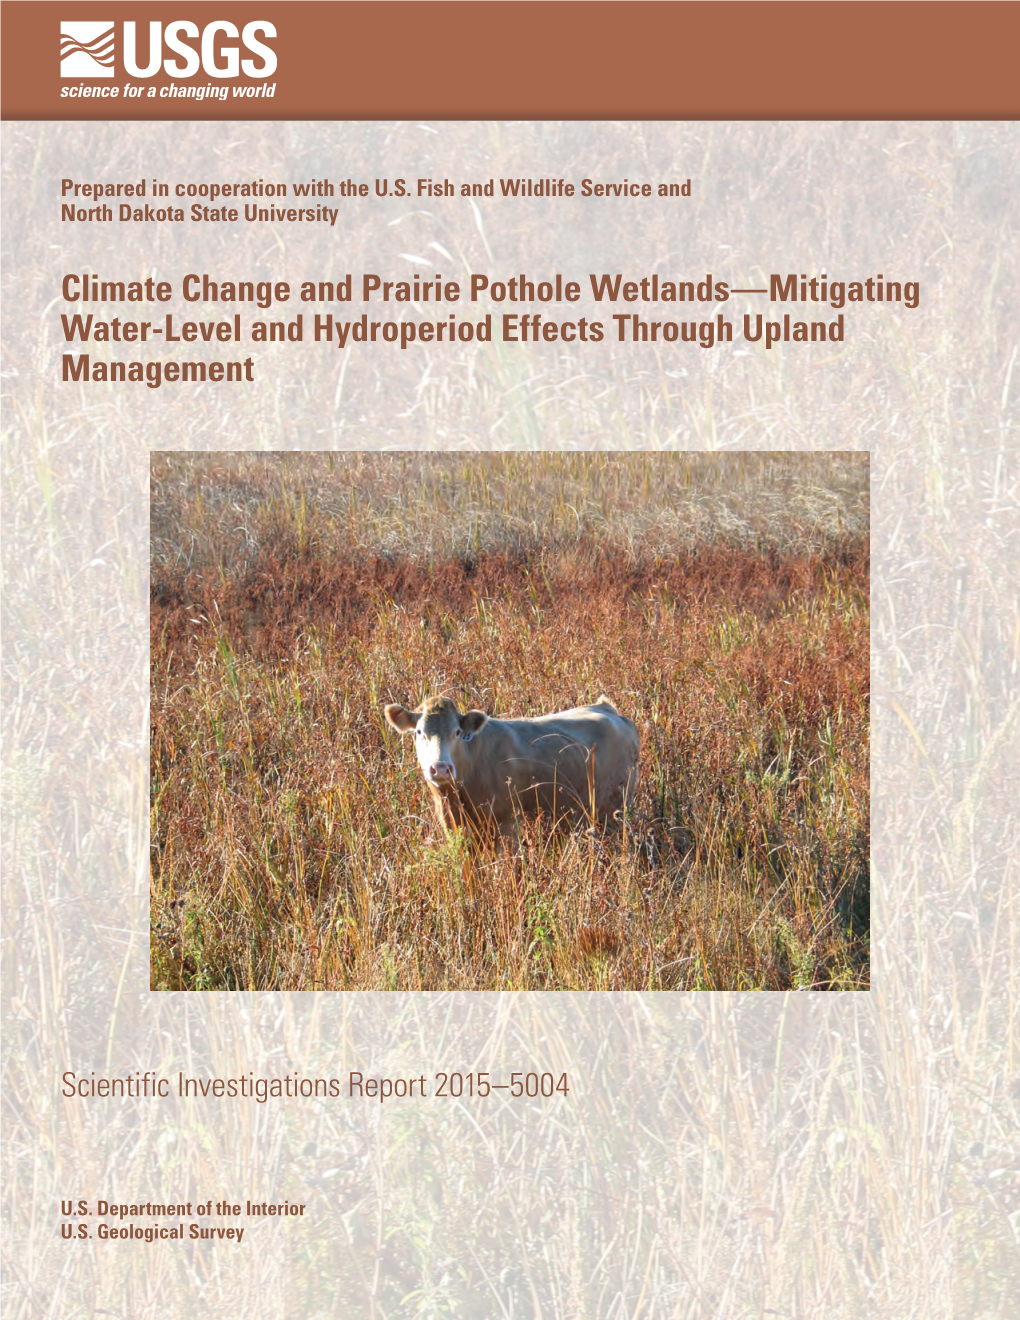 Climate Change and Prairie Pothole Wetlands—Mitigating Water-Level and Hydroperiod Effects Through Upland Management